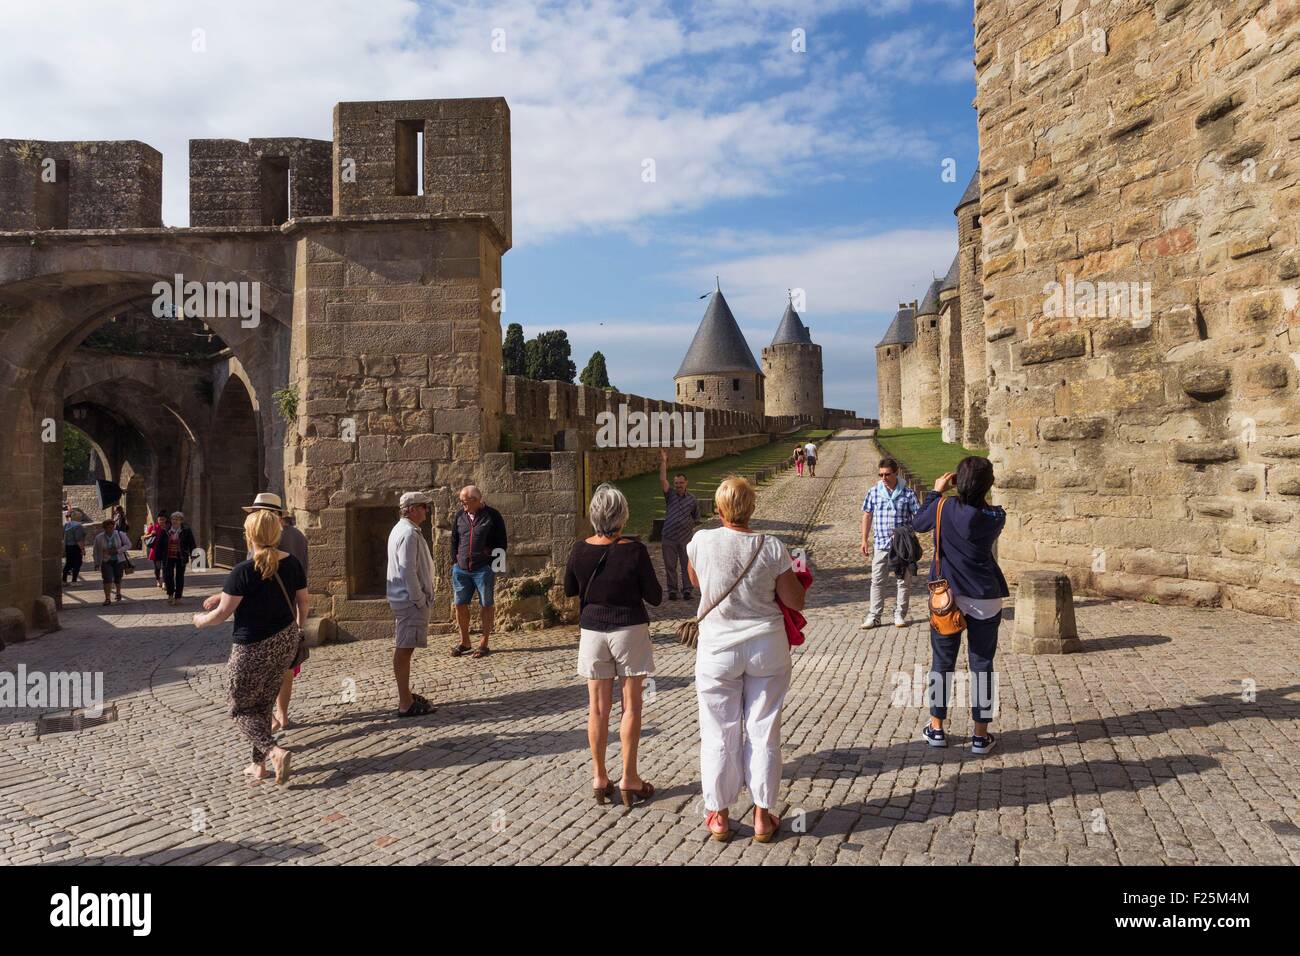 France, Aude, Carcassonne, medieval town listed as World Heritage by UNESCO, Stock Photo